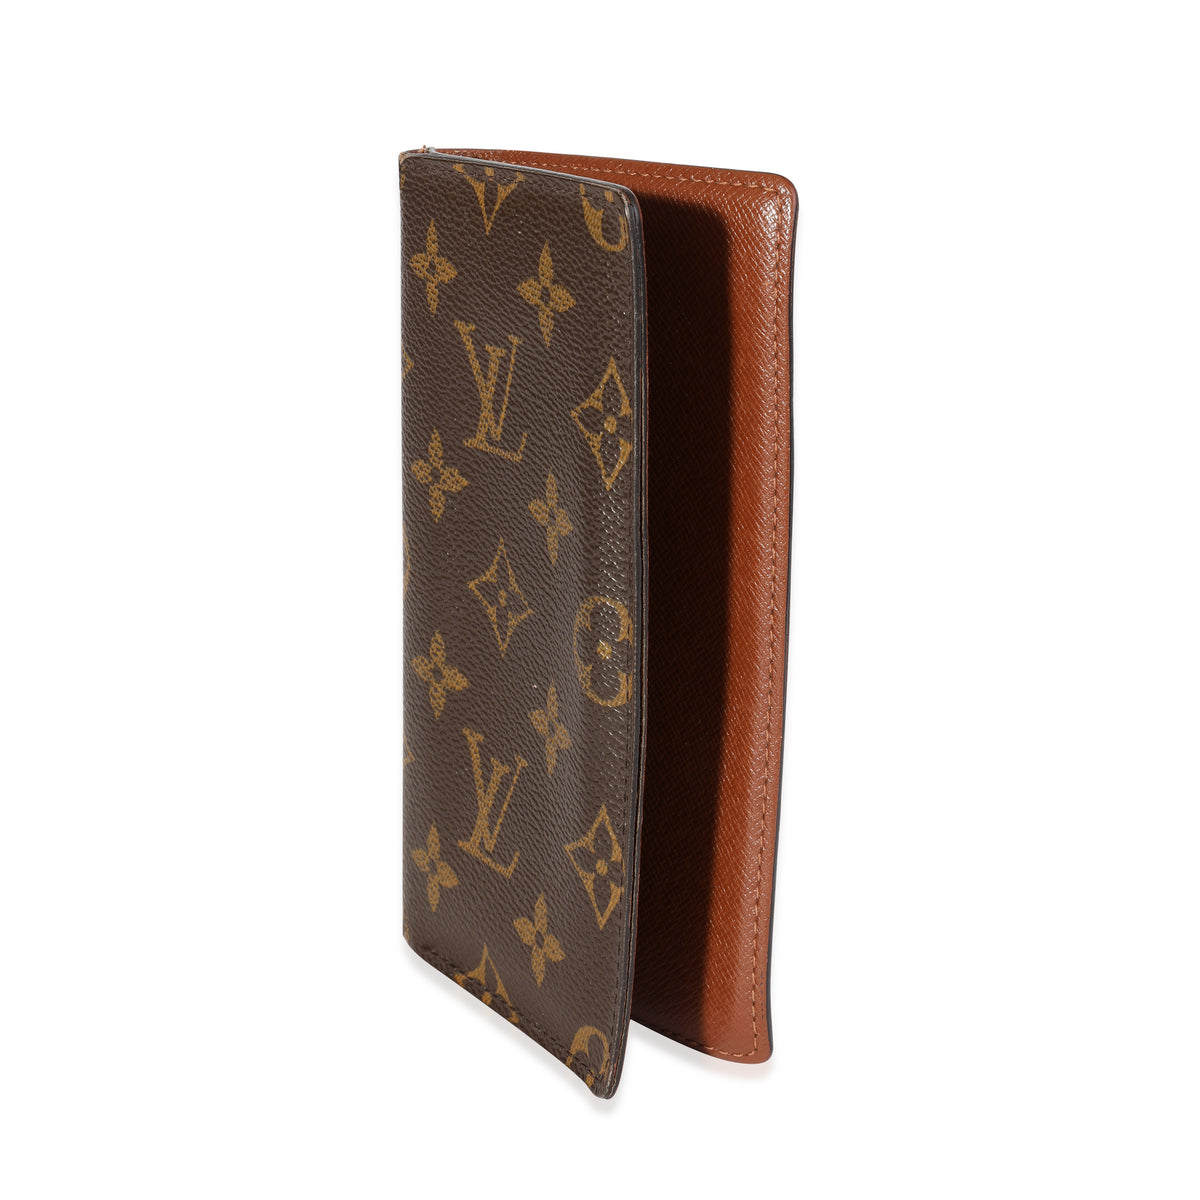 How to use the Louis Vuitton Pocket Agenda as a wallet/checkbook cover!! 